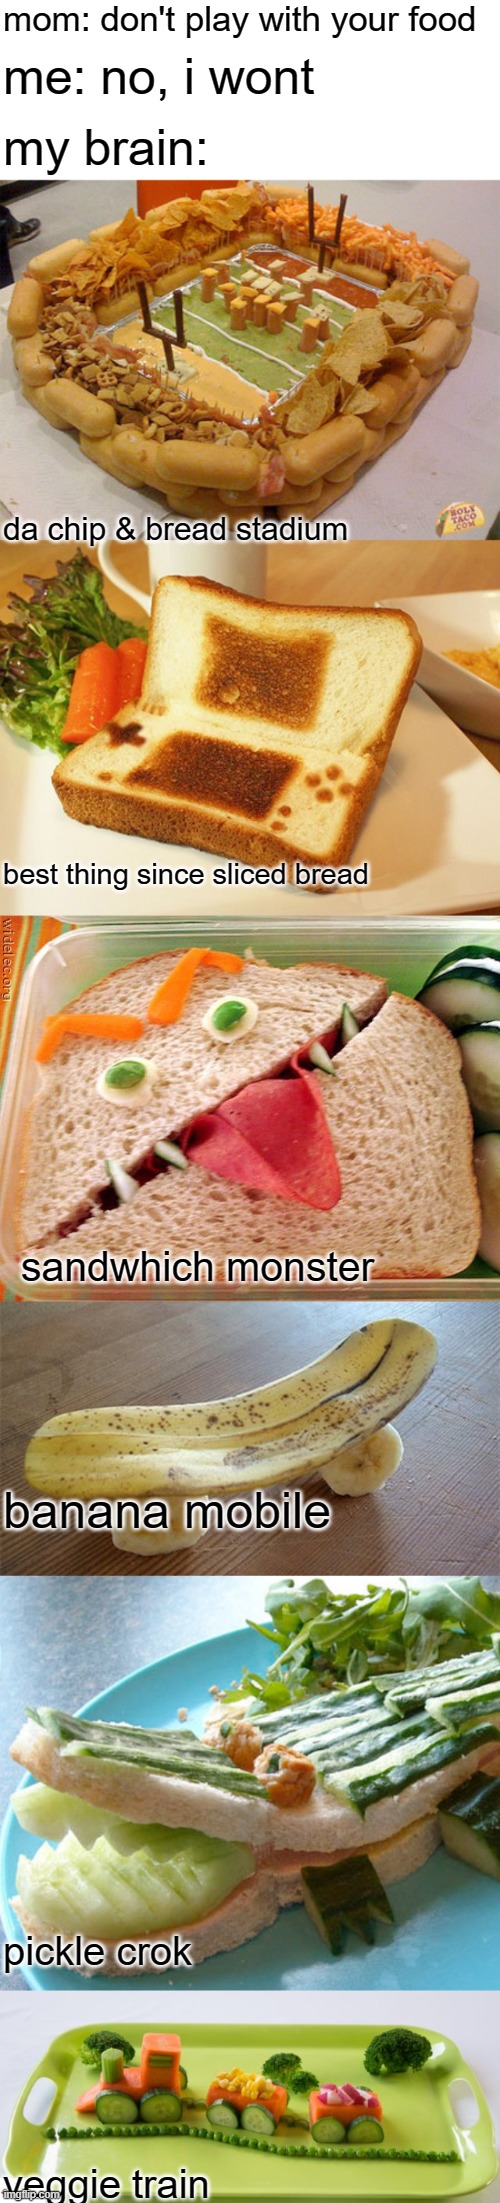 dish - mom don't play with your food me no, i wont my brain Boly .Com da chip & bread stadium best thing since sliced bread sandwhich monster banana mobile pickle crok veggie train